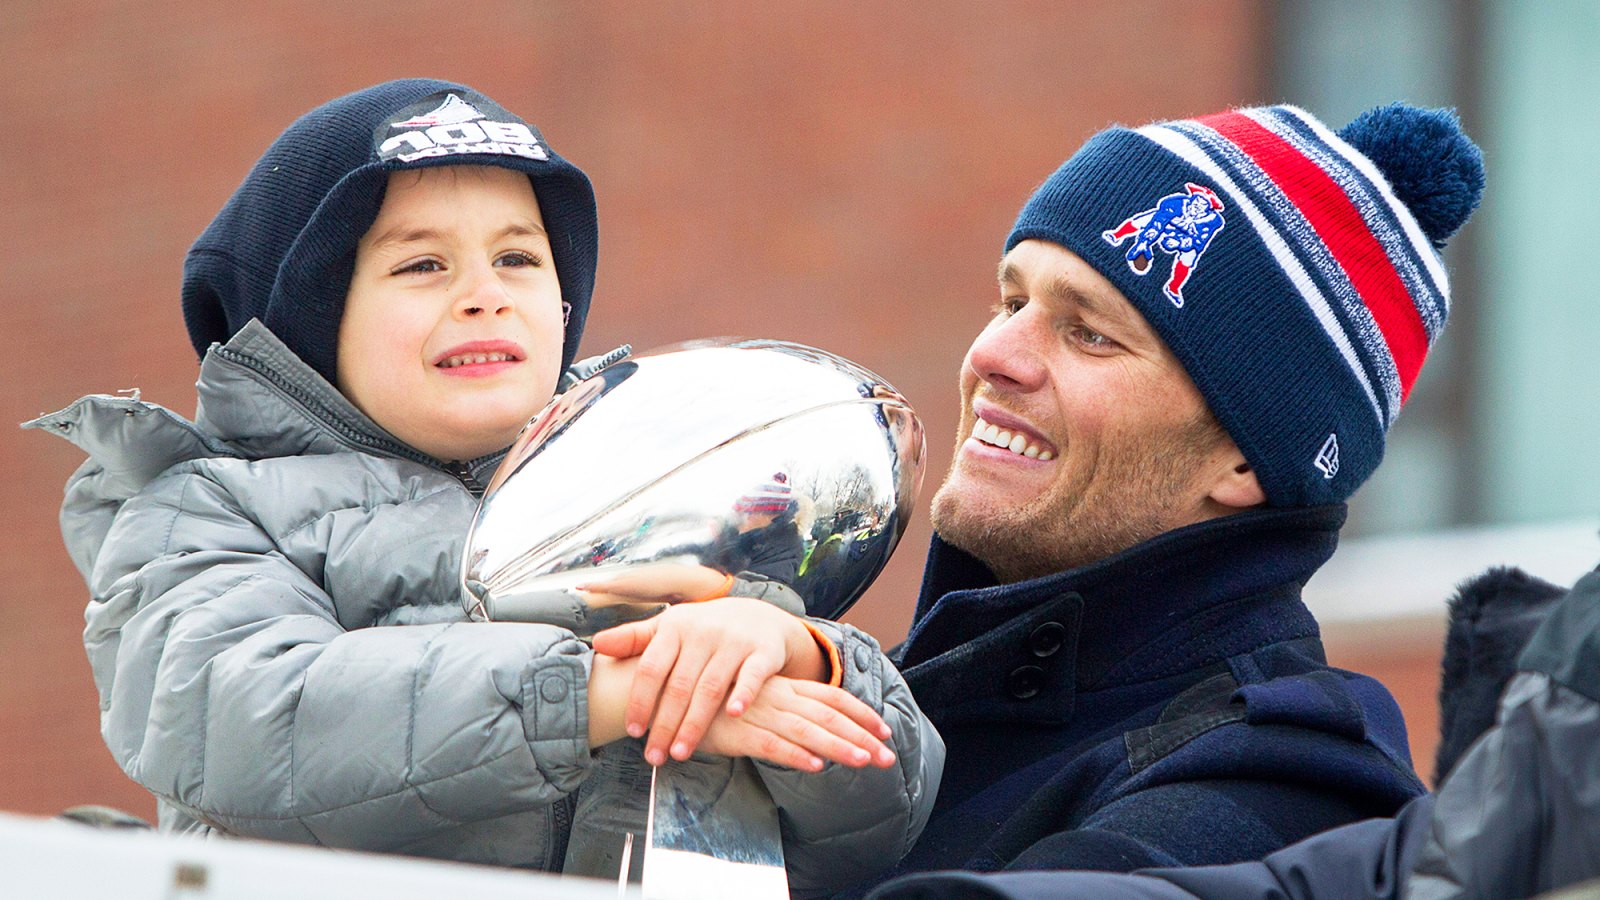 Tom Brady and son Benjamin holds the Lombardi trophy during the New England Patriots Victory 2015 Parade in Boston, Massachusetts.